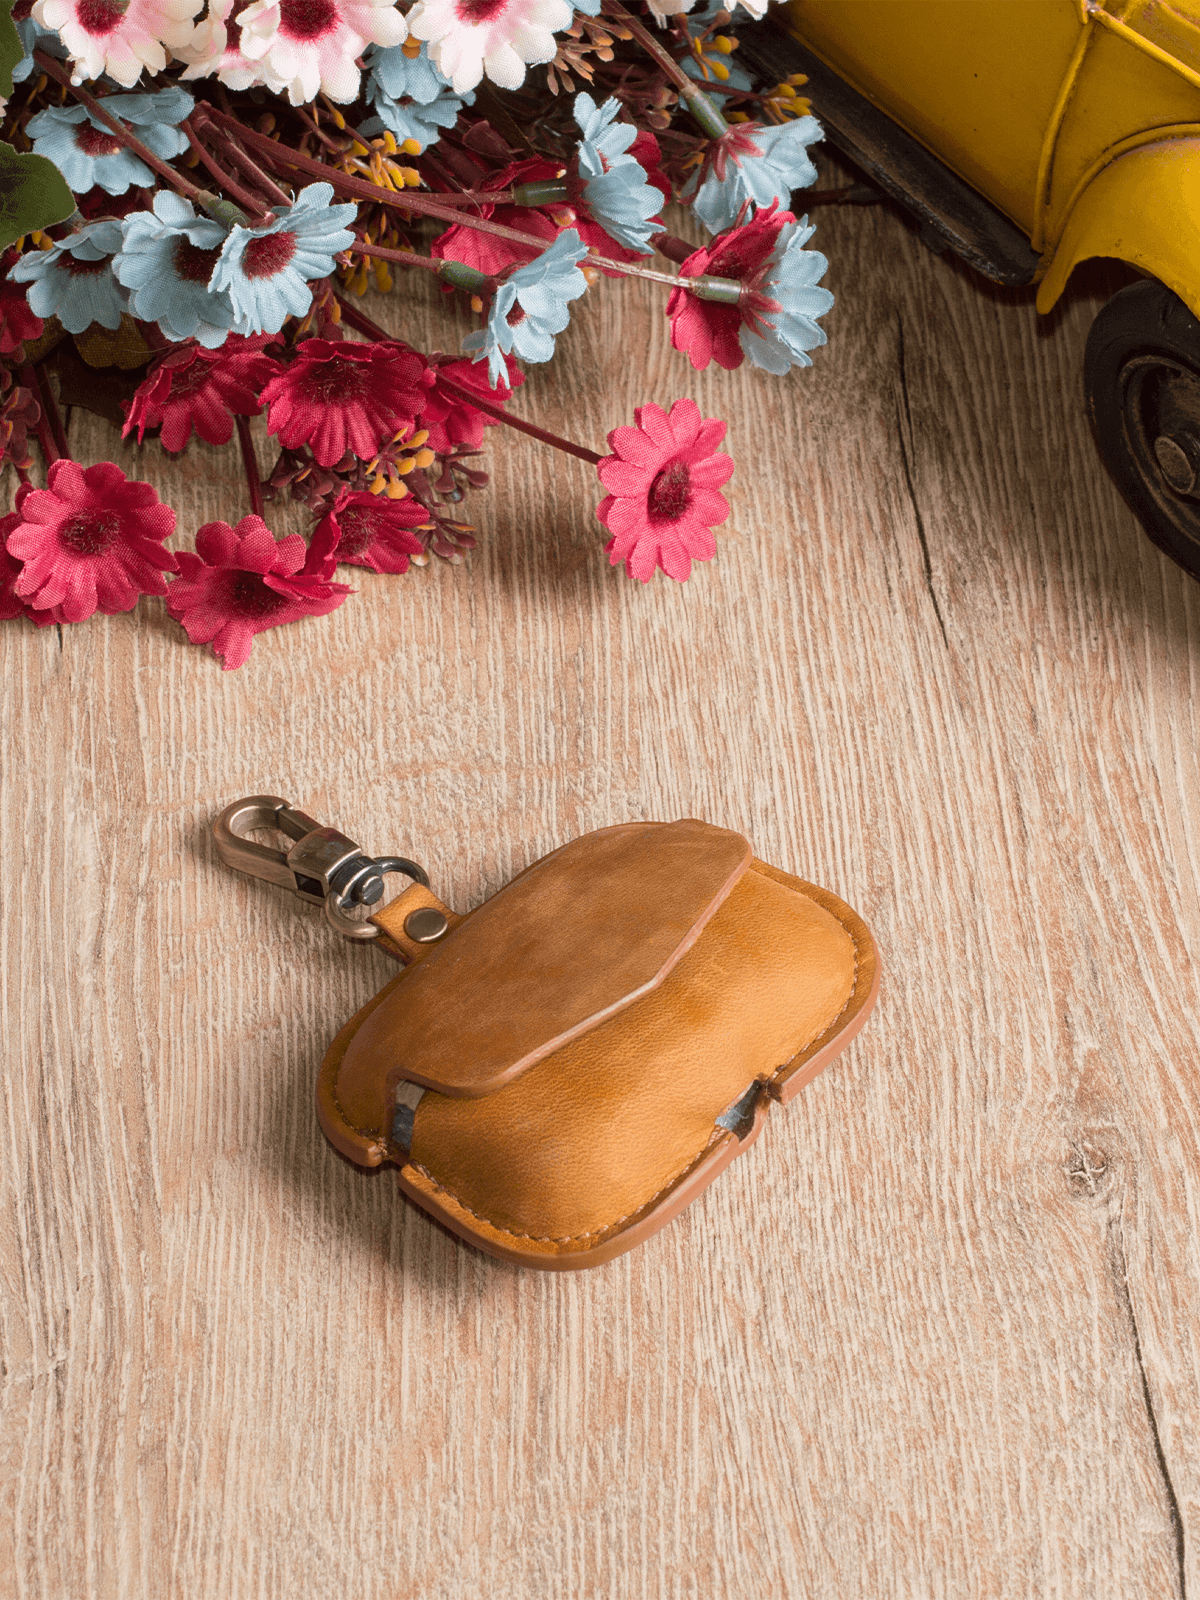 Genuine Leather Tan Color Airdpods Case